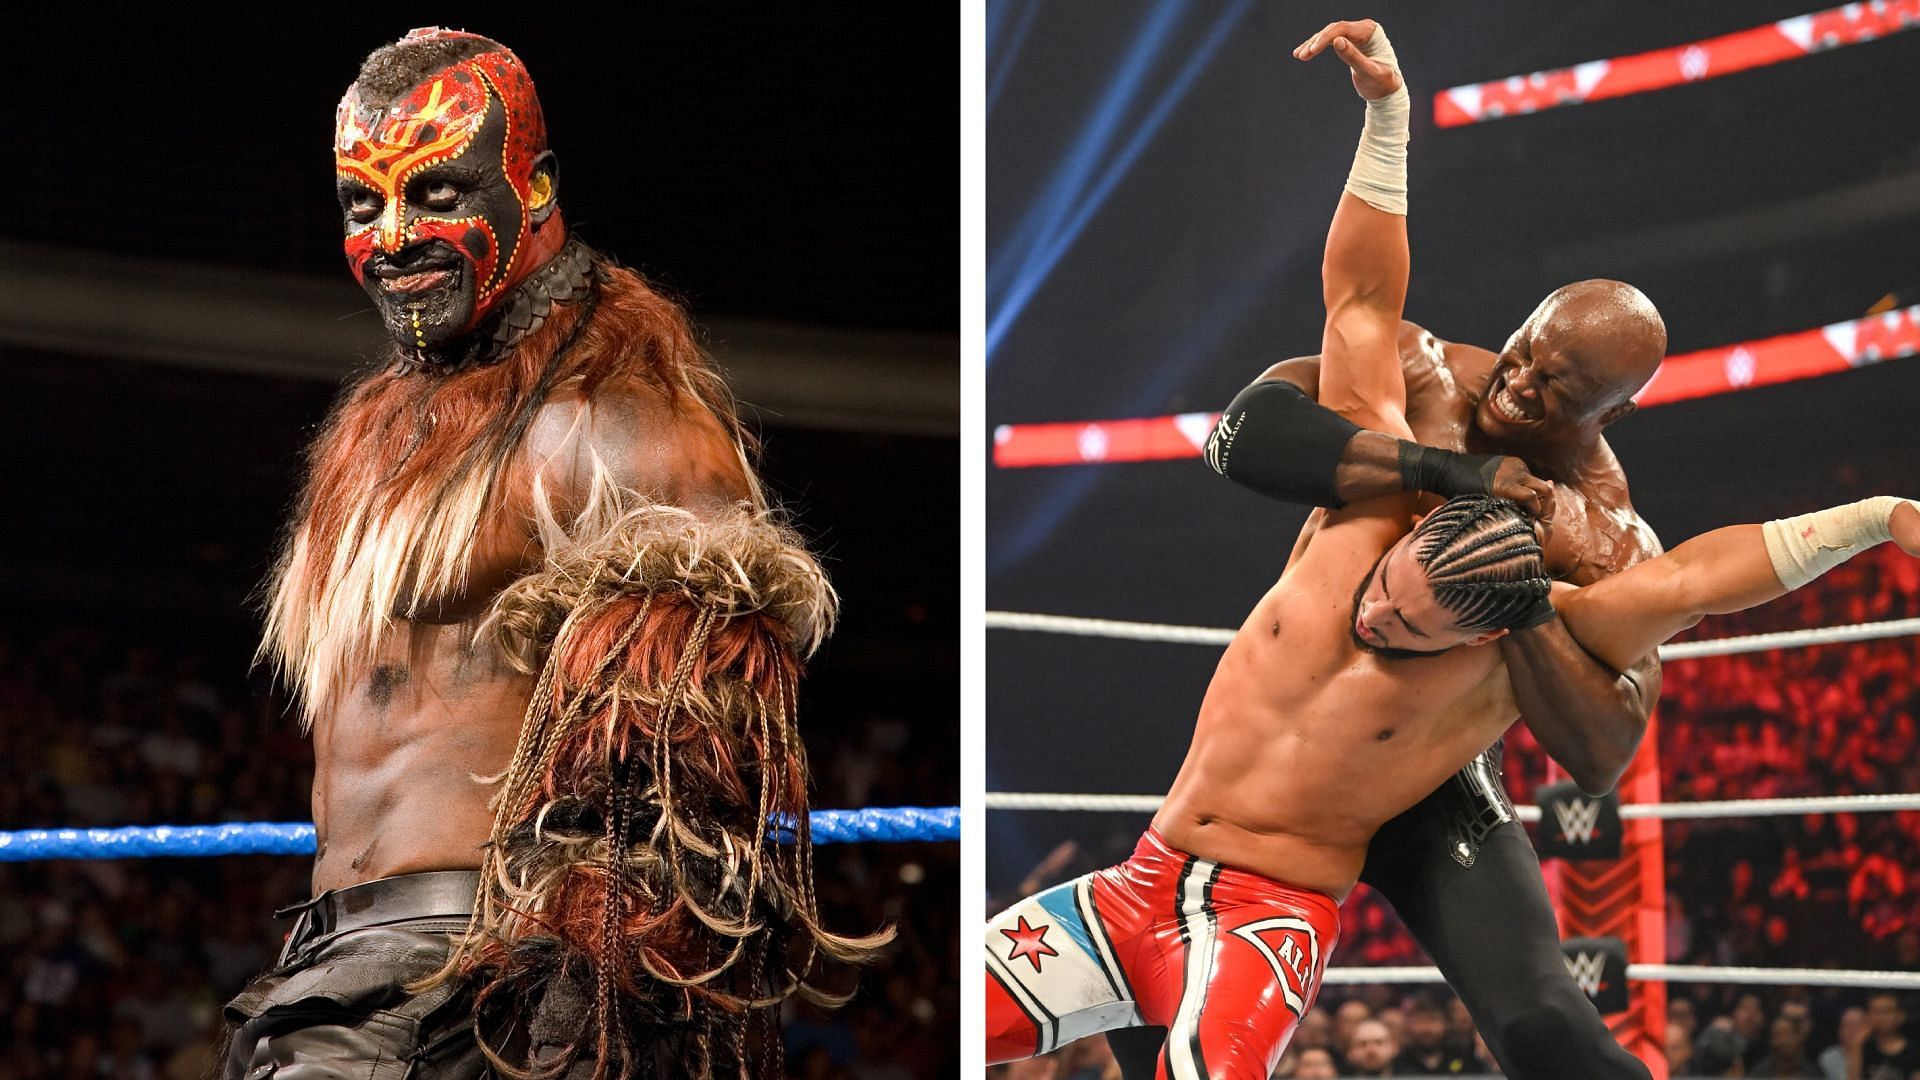 5 Ways The Boogeyman could return to WWE